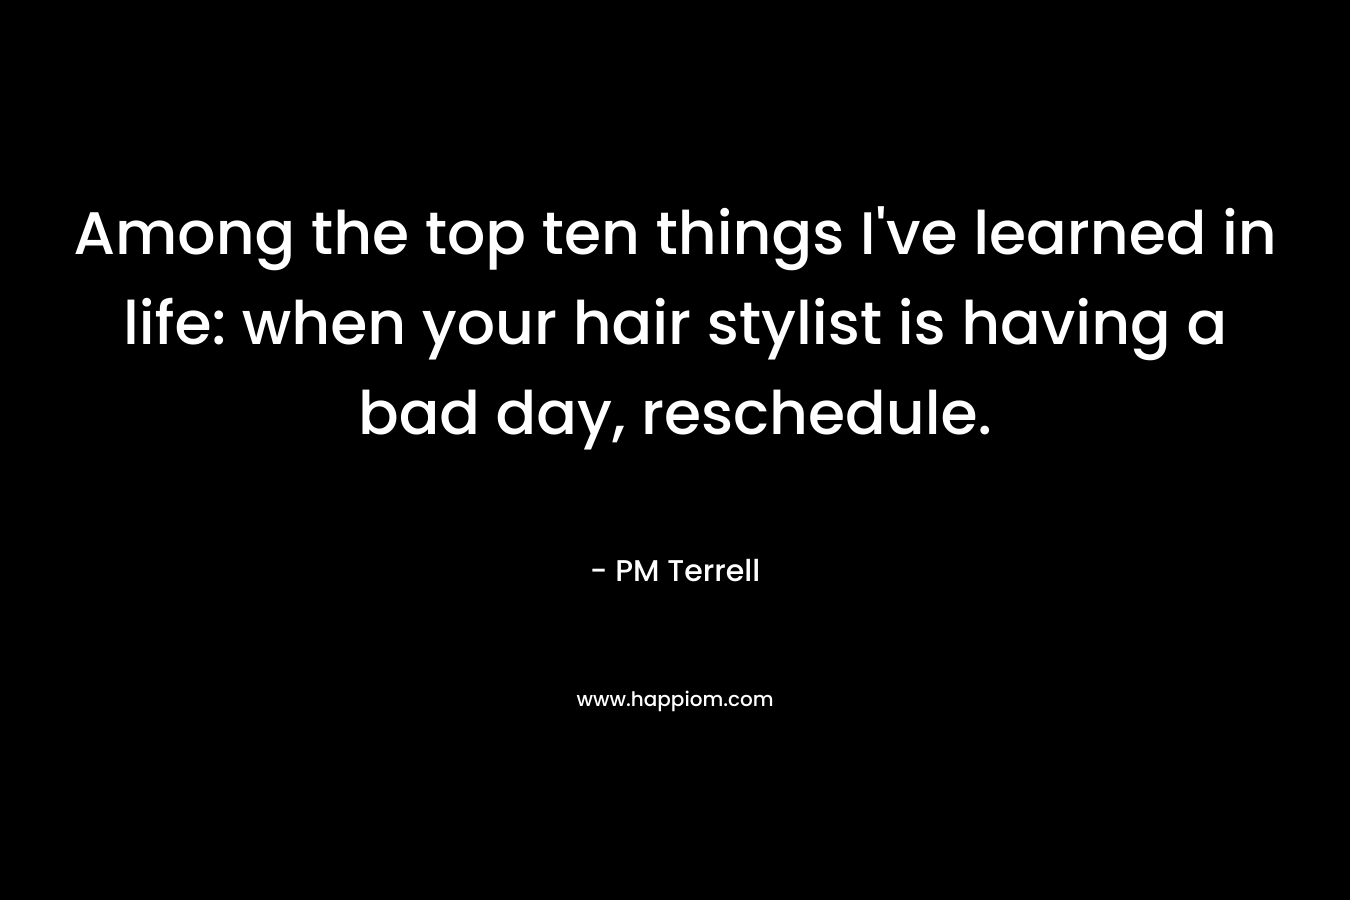 Among the top ten things I’ve learned in life: when your hair stylist is having a bad day, reschedule. – PM Terrell